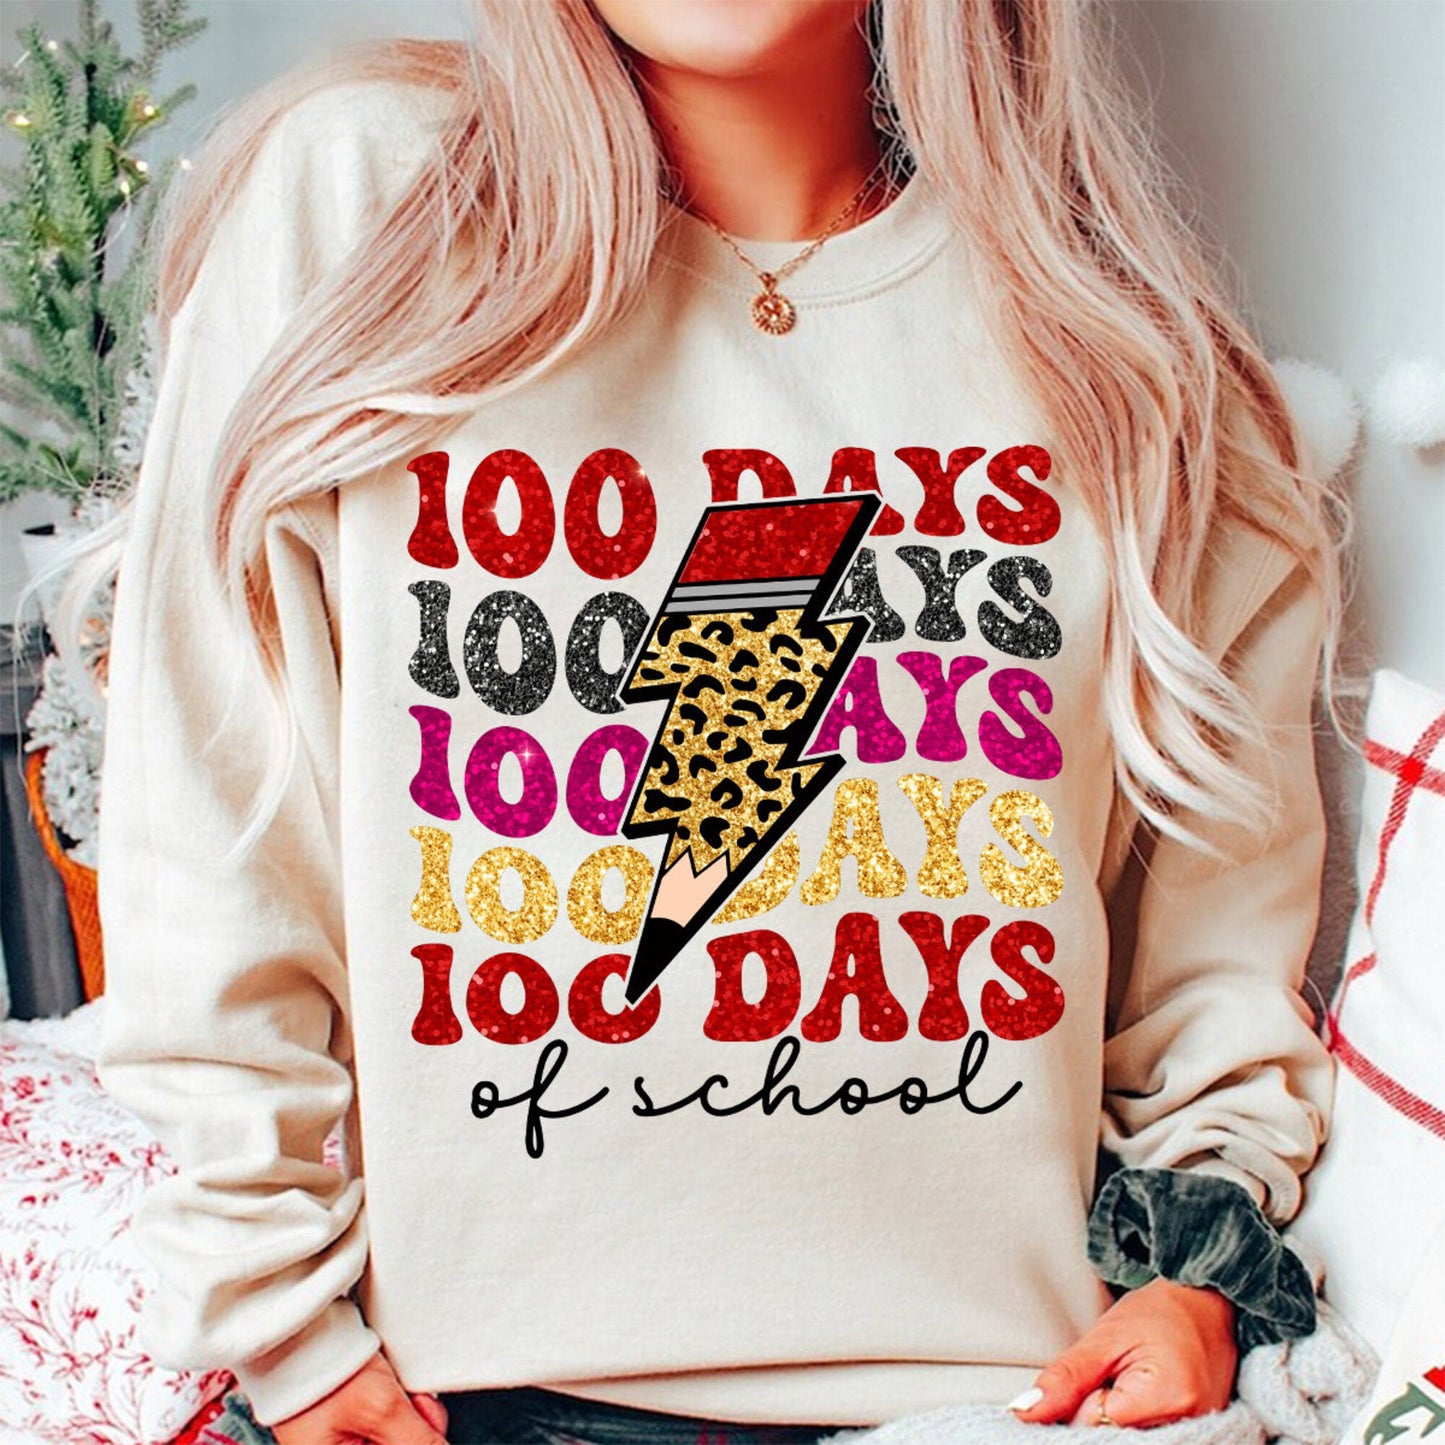 100 Days of School Png, Happy 100 Days of School Faux Sequin PNG Sparkly, School 100th Day Png, Back to School Png, Teacher Glitter Pencils - VartDigitals